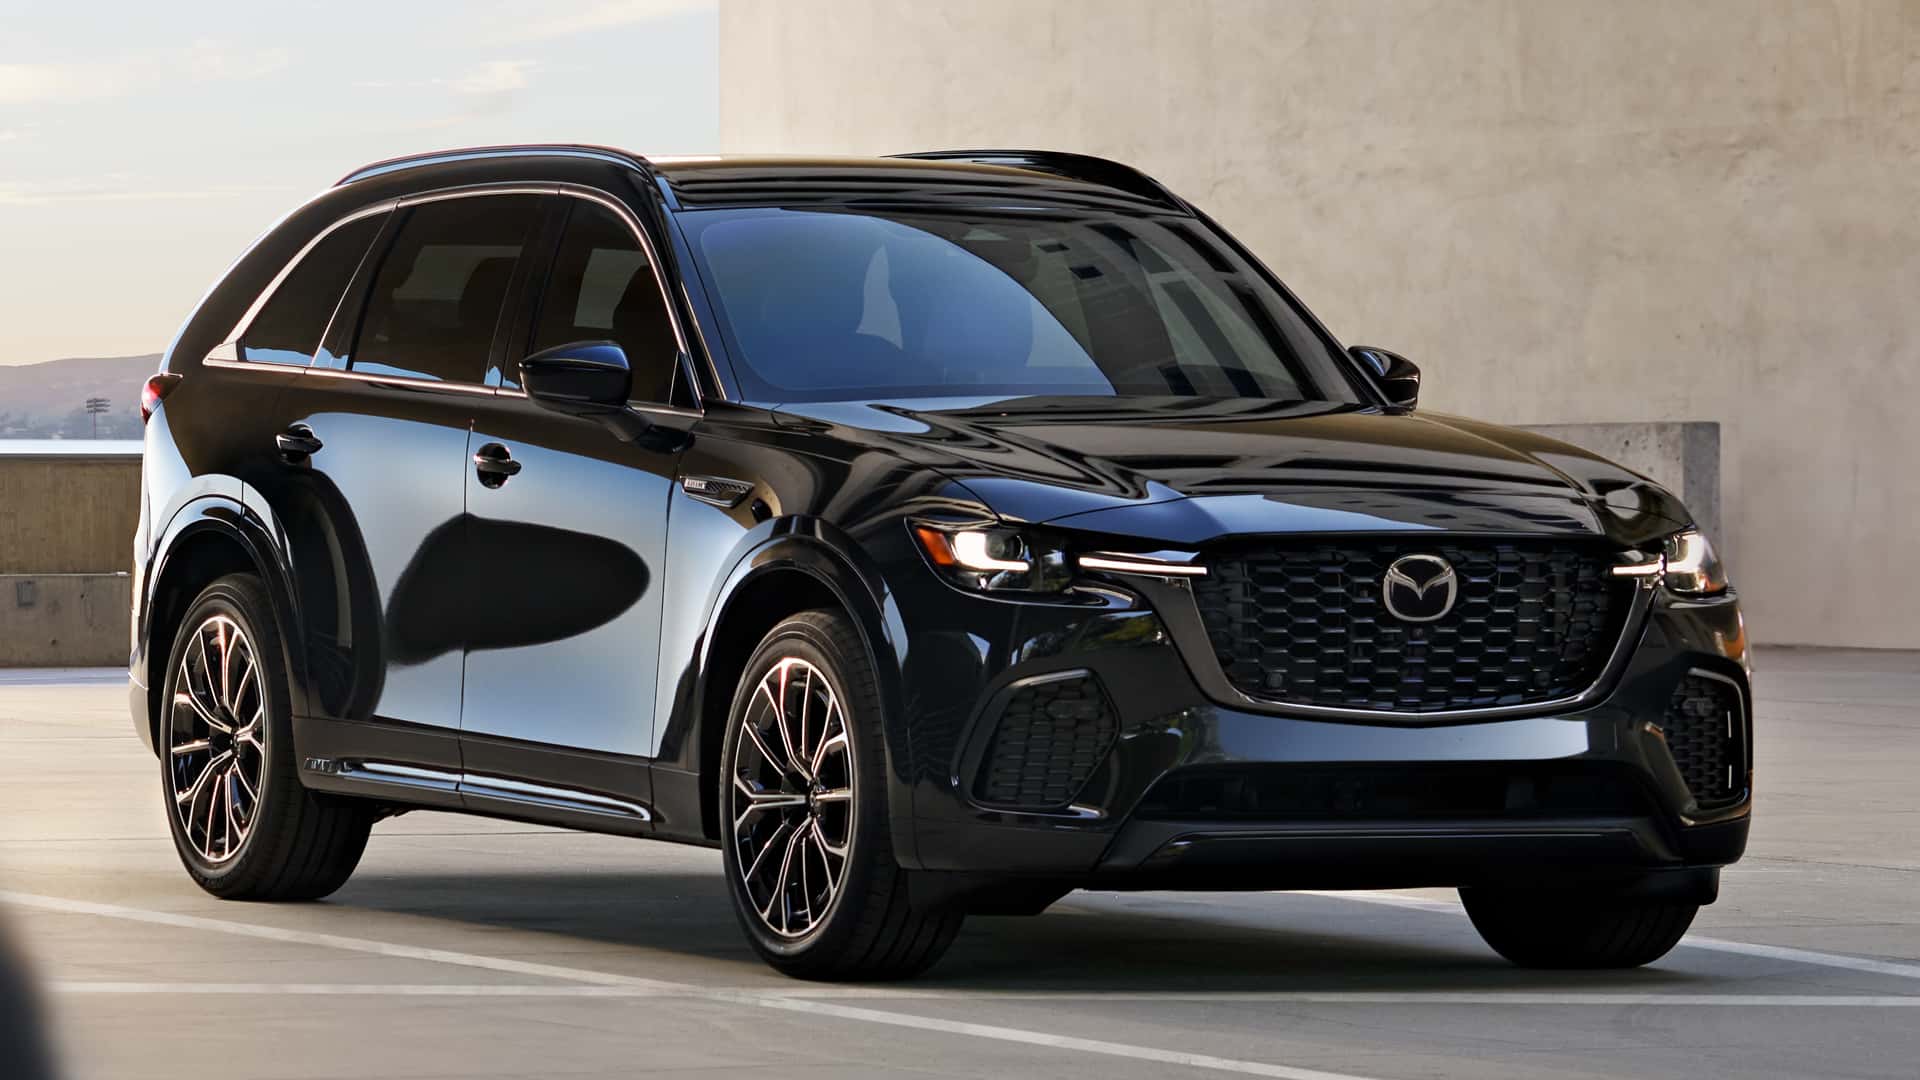 Introducing the New Mazda CX-70: Sporty Design, Hybrid Power, and Smart Integration